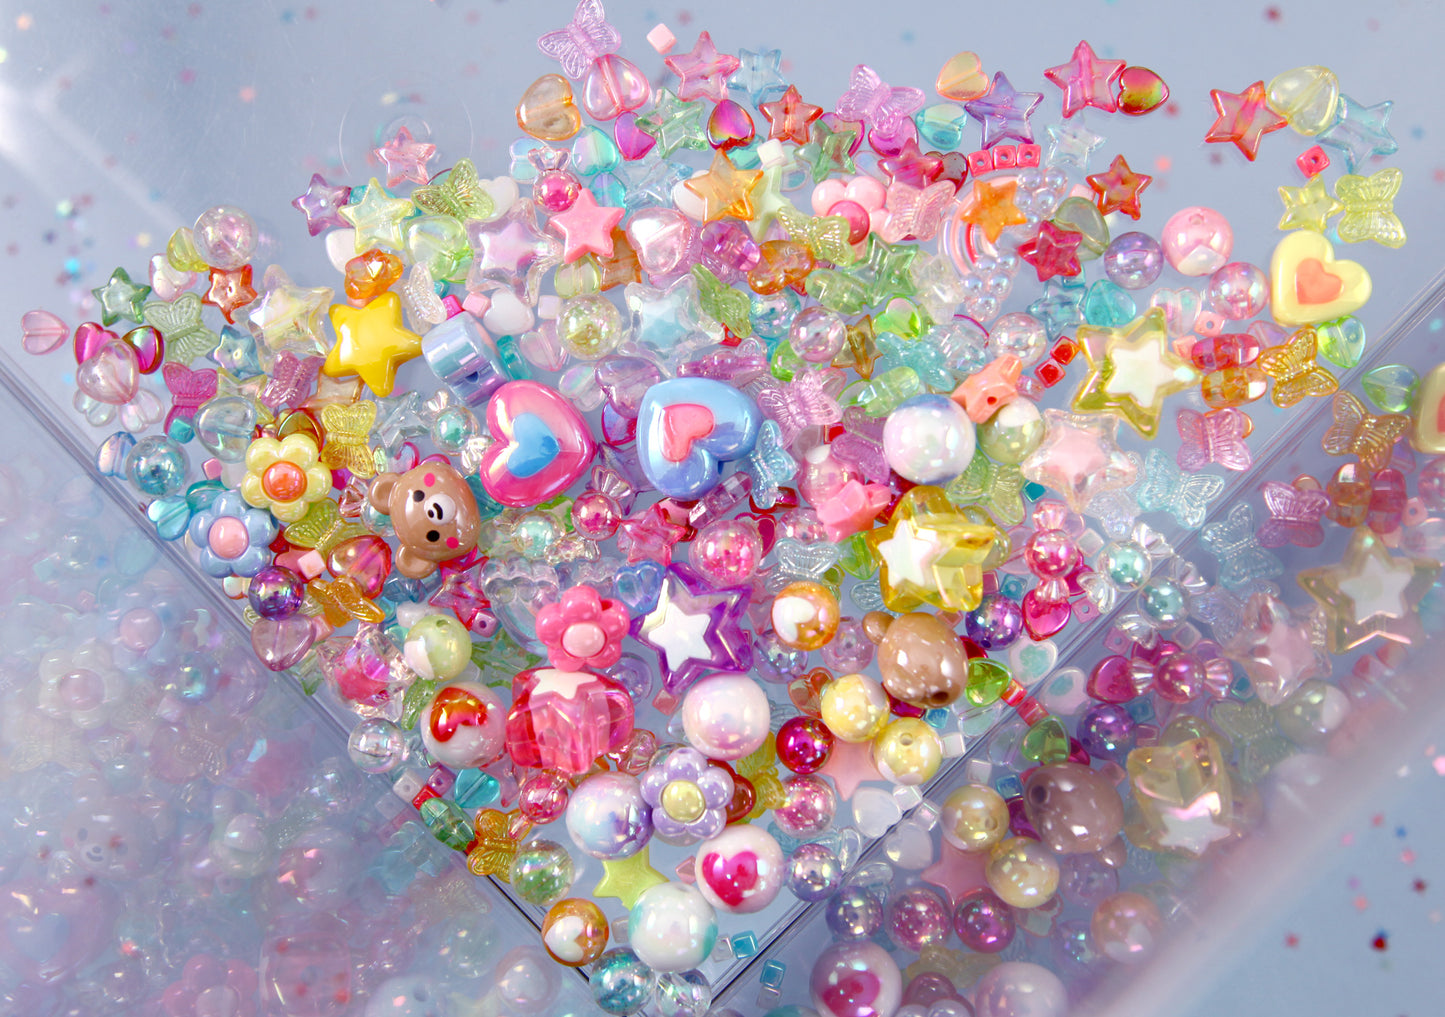 Acrylic Bead Grab Bag - AB / Iridescent Colors - Mixed Lot of Plastic Beads - great for kandi, ispy, sensory crafts, jewelry making - Over 200 pcs